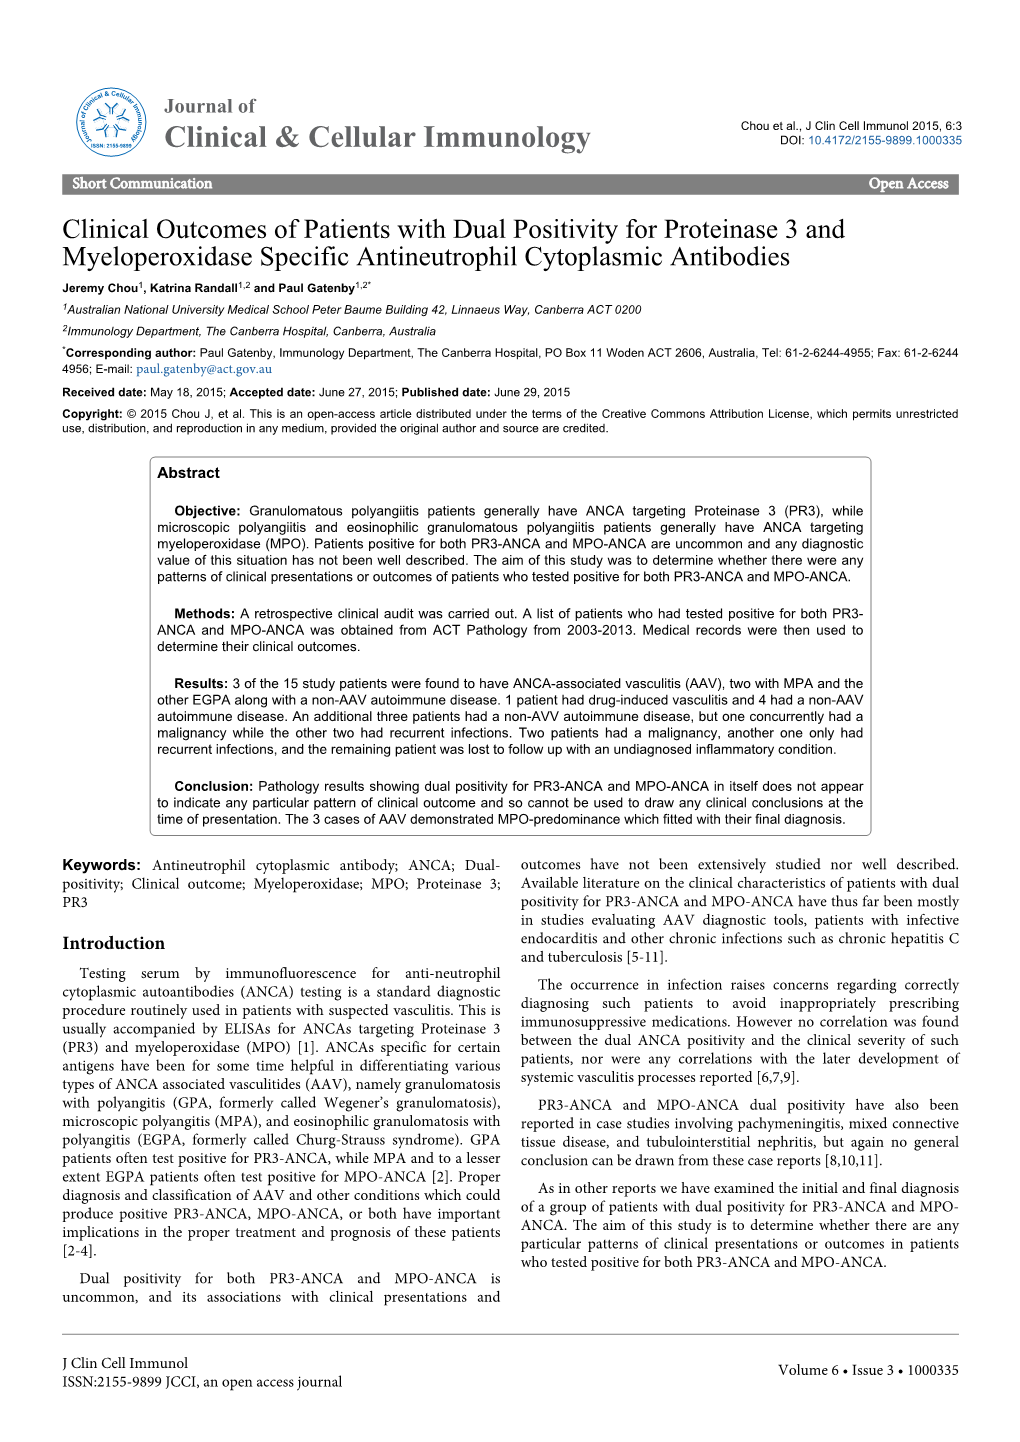 Clinical Outcomes of Patients with Dual Positivity for Proteinase 3 And